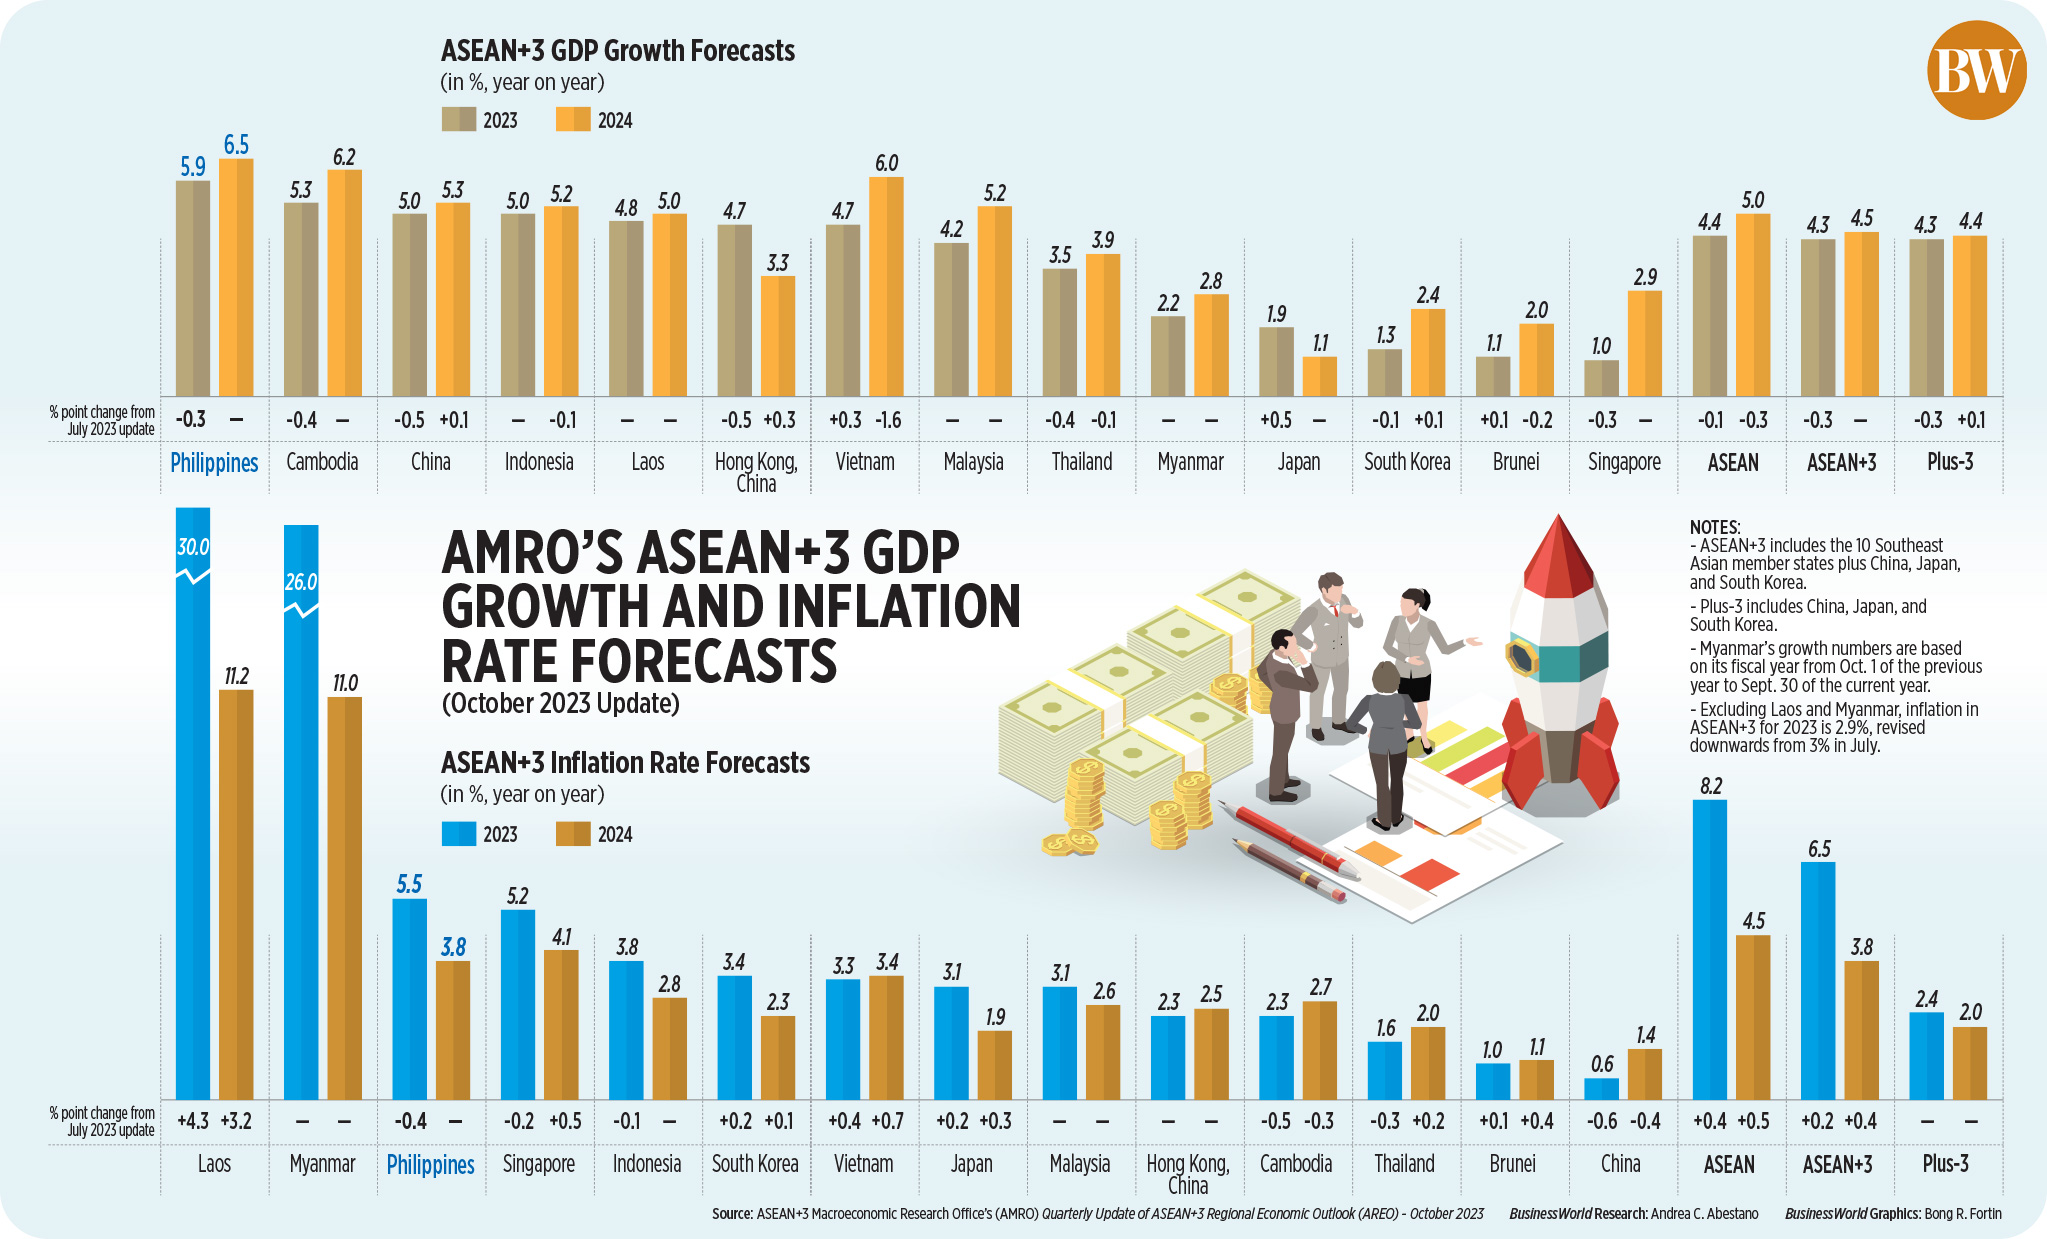 AMRO's ASEAN+3 GDP growth and inflation rate forecasts